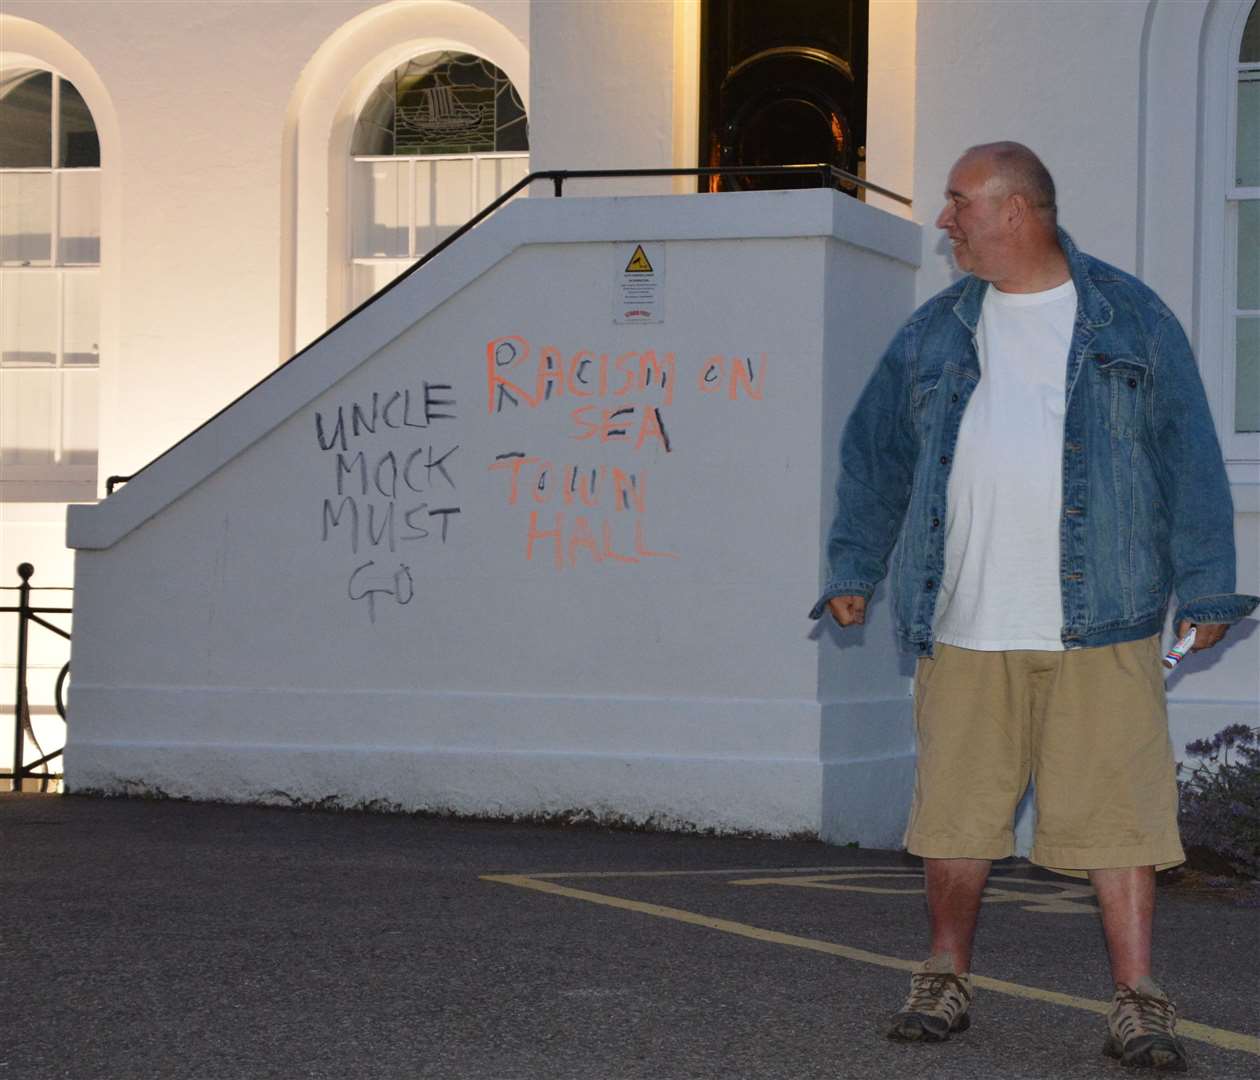 Former councillor Ian Driver says he is responsible for the graffiti. Picture: Ian Driver